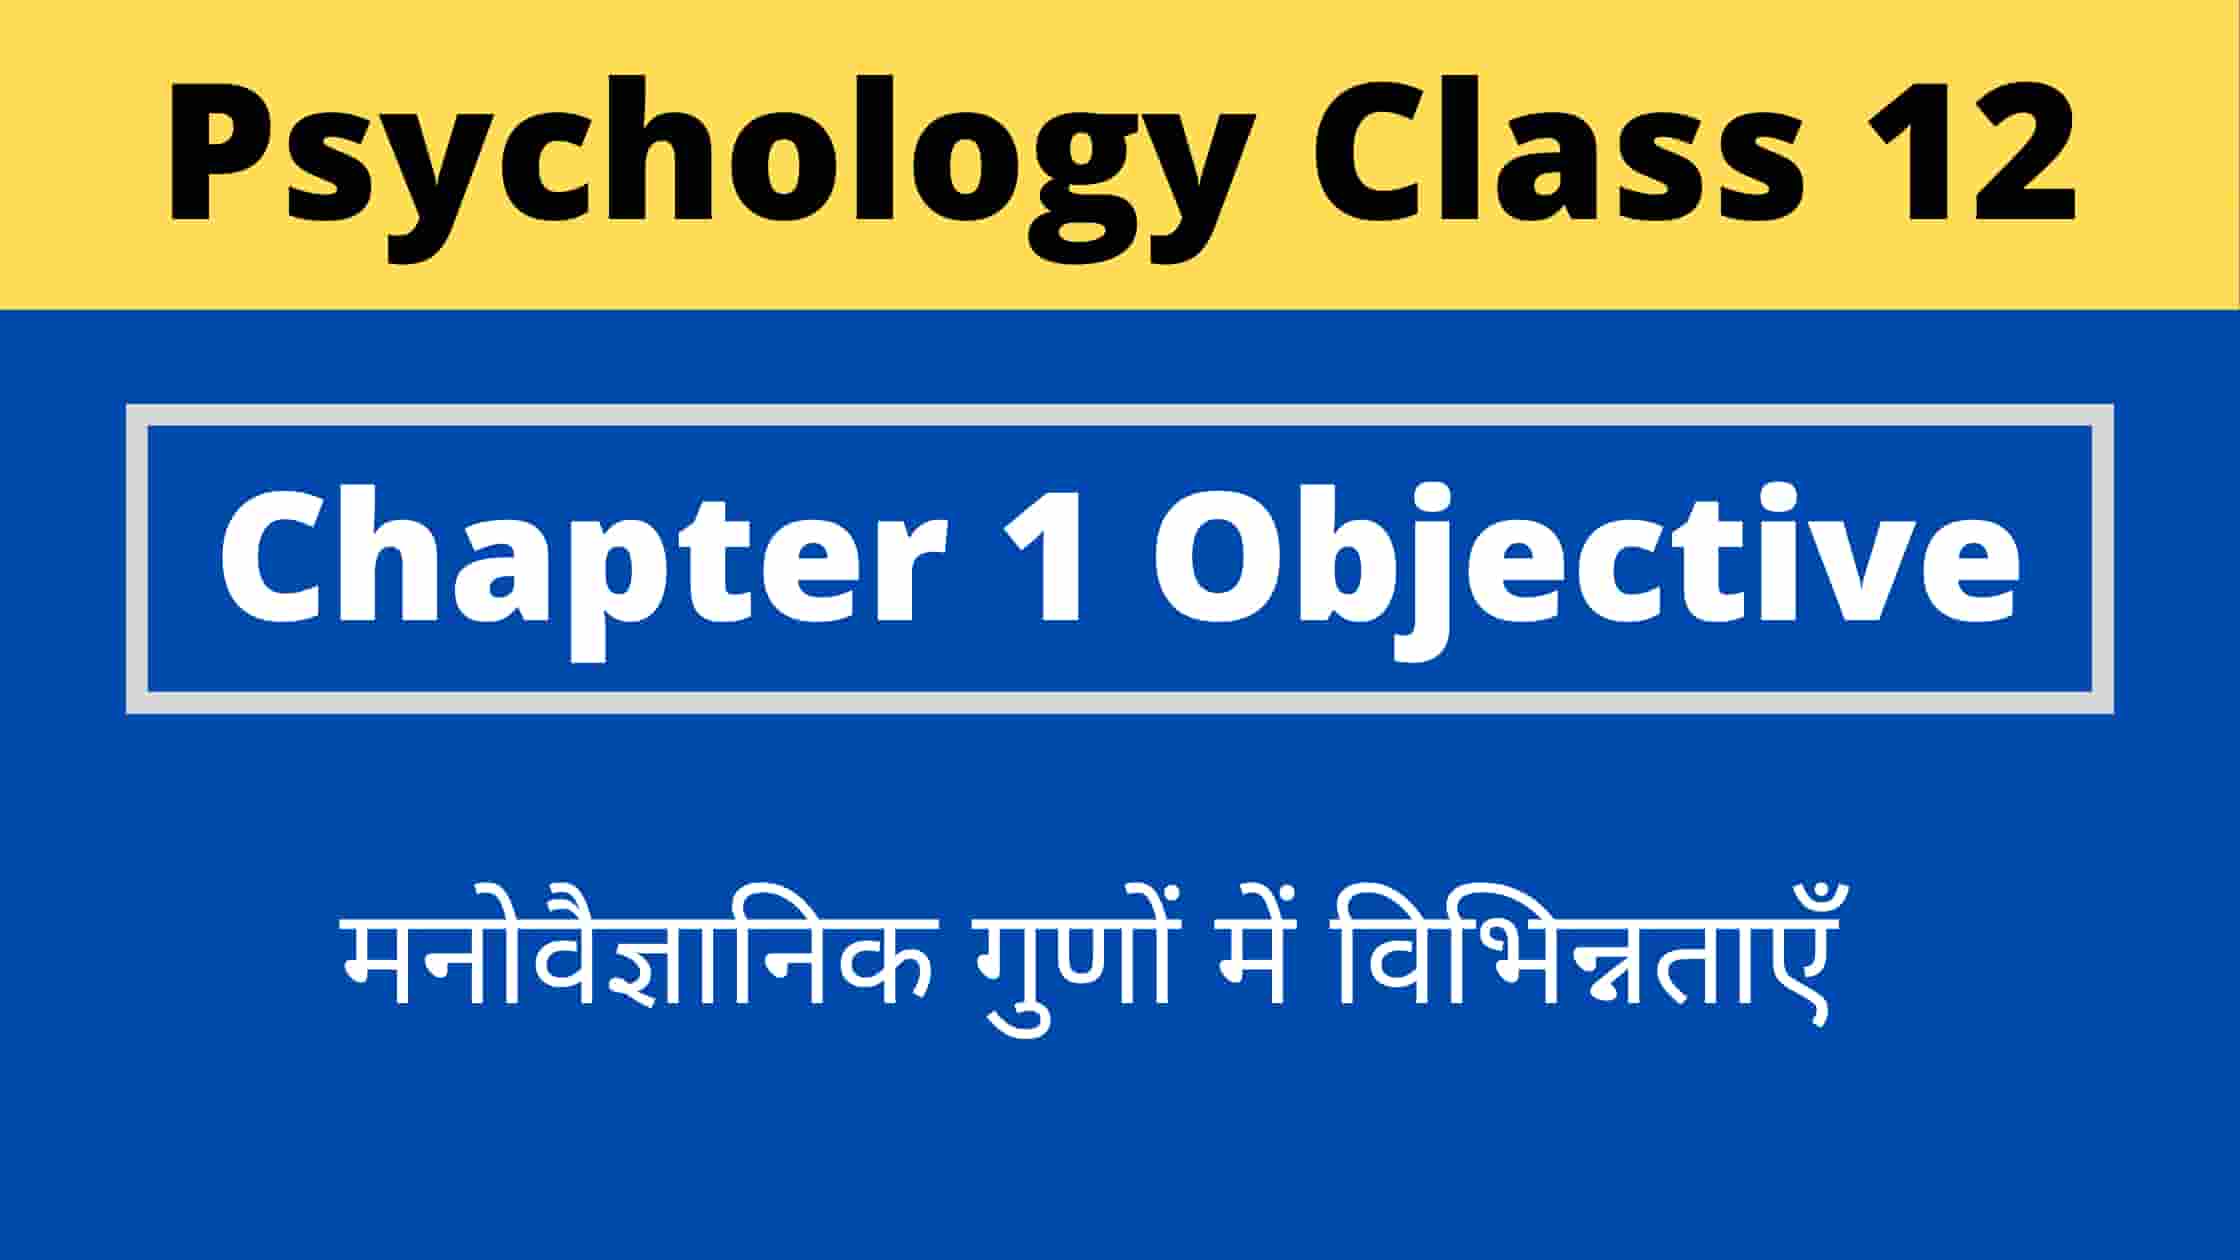 You are currently viewing Psychology Class 12 Chapter 1